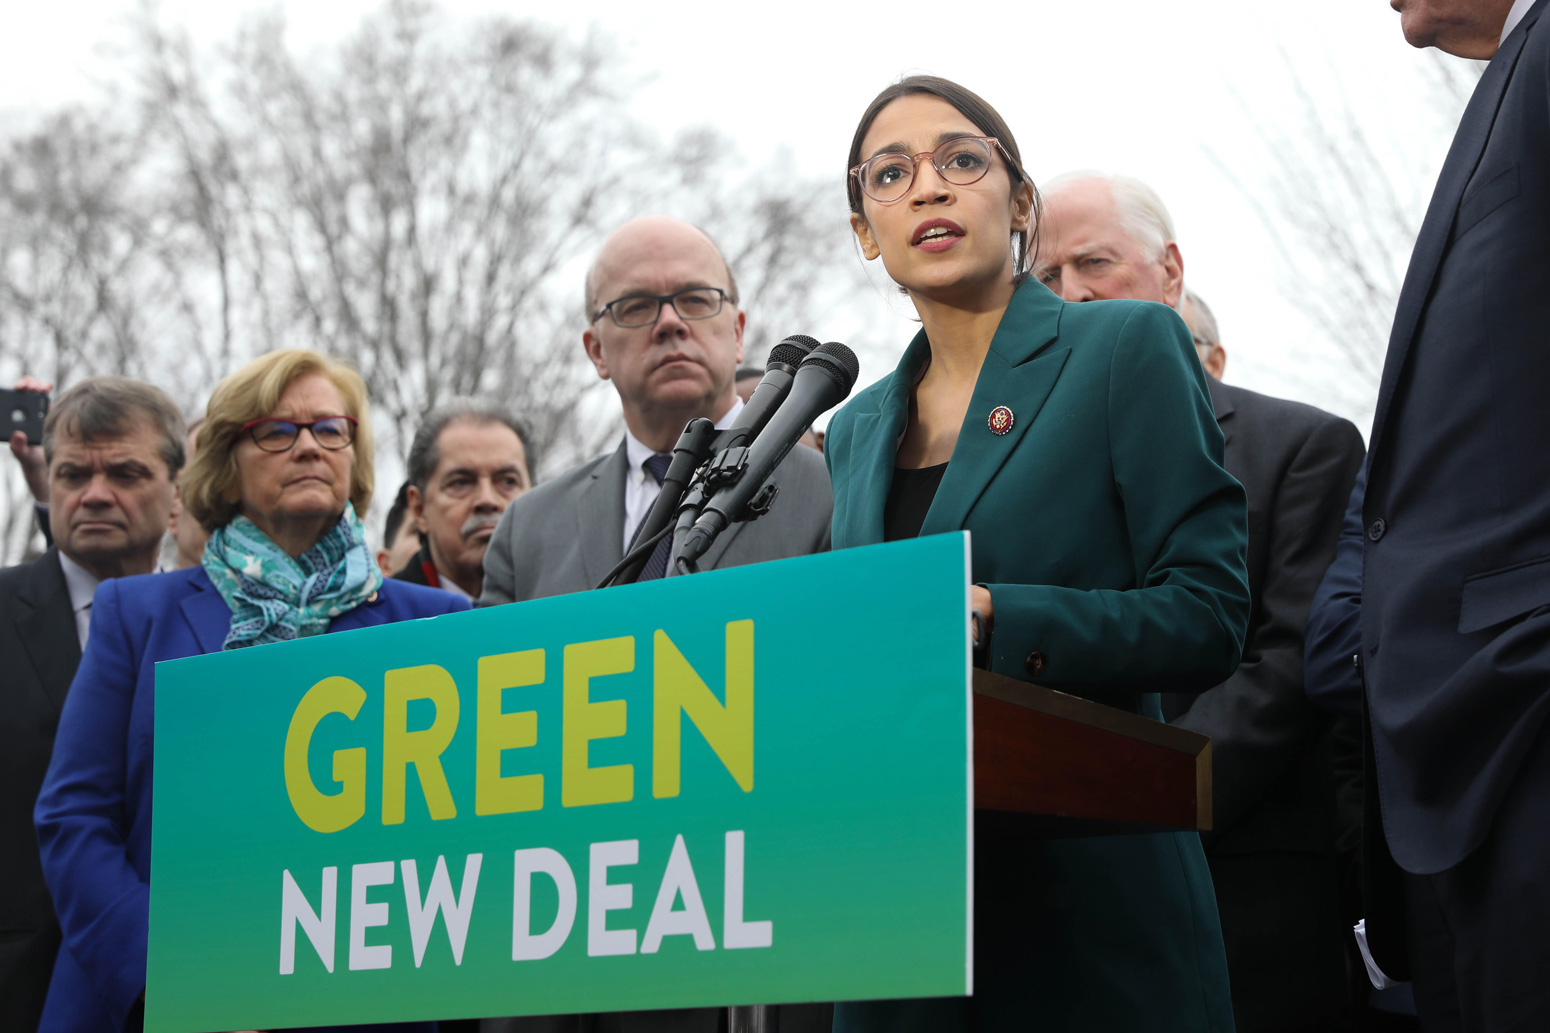 Alexandria-Ocasio-Cortez-along-with-other-members-of-Congress-announce-the-Green-New-Deal-legislation